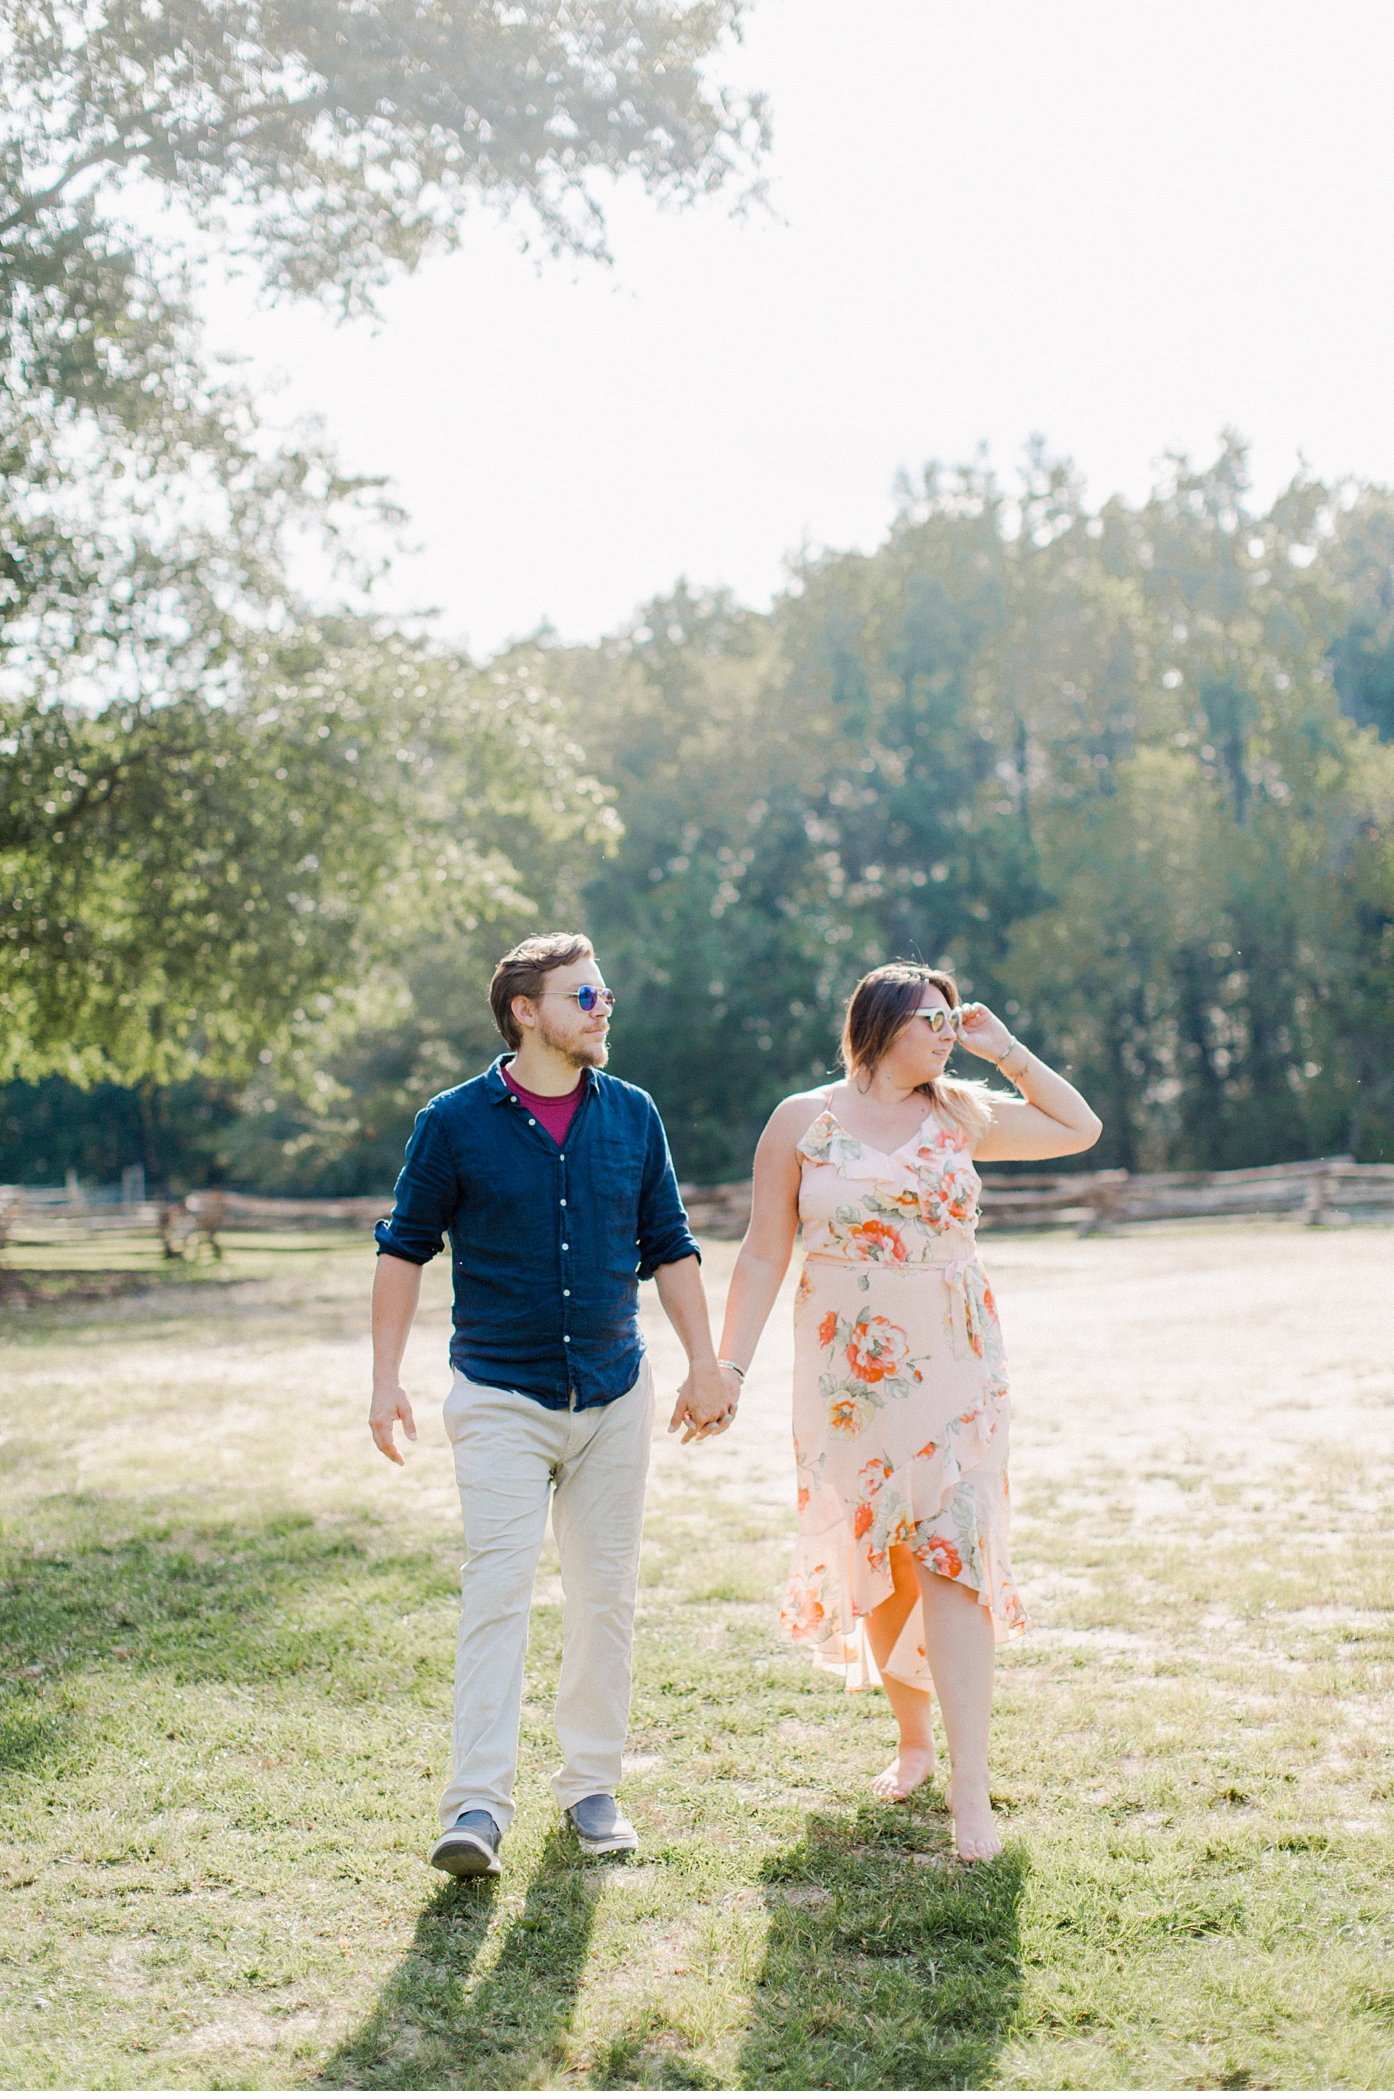 Meadows Farm Crump Park Engagement Session by Alisandra Photography